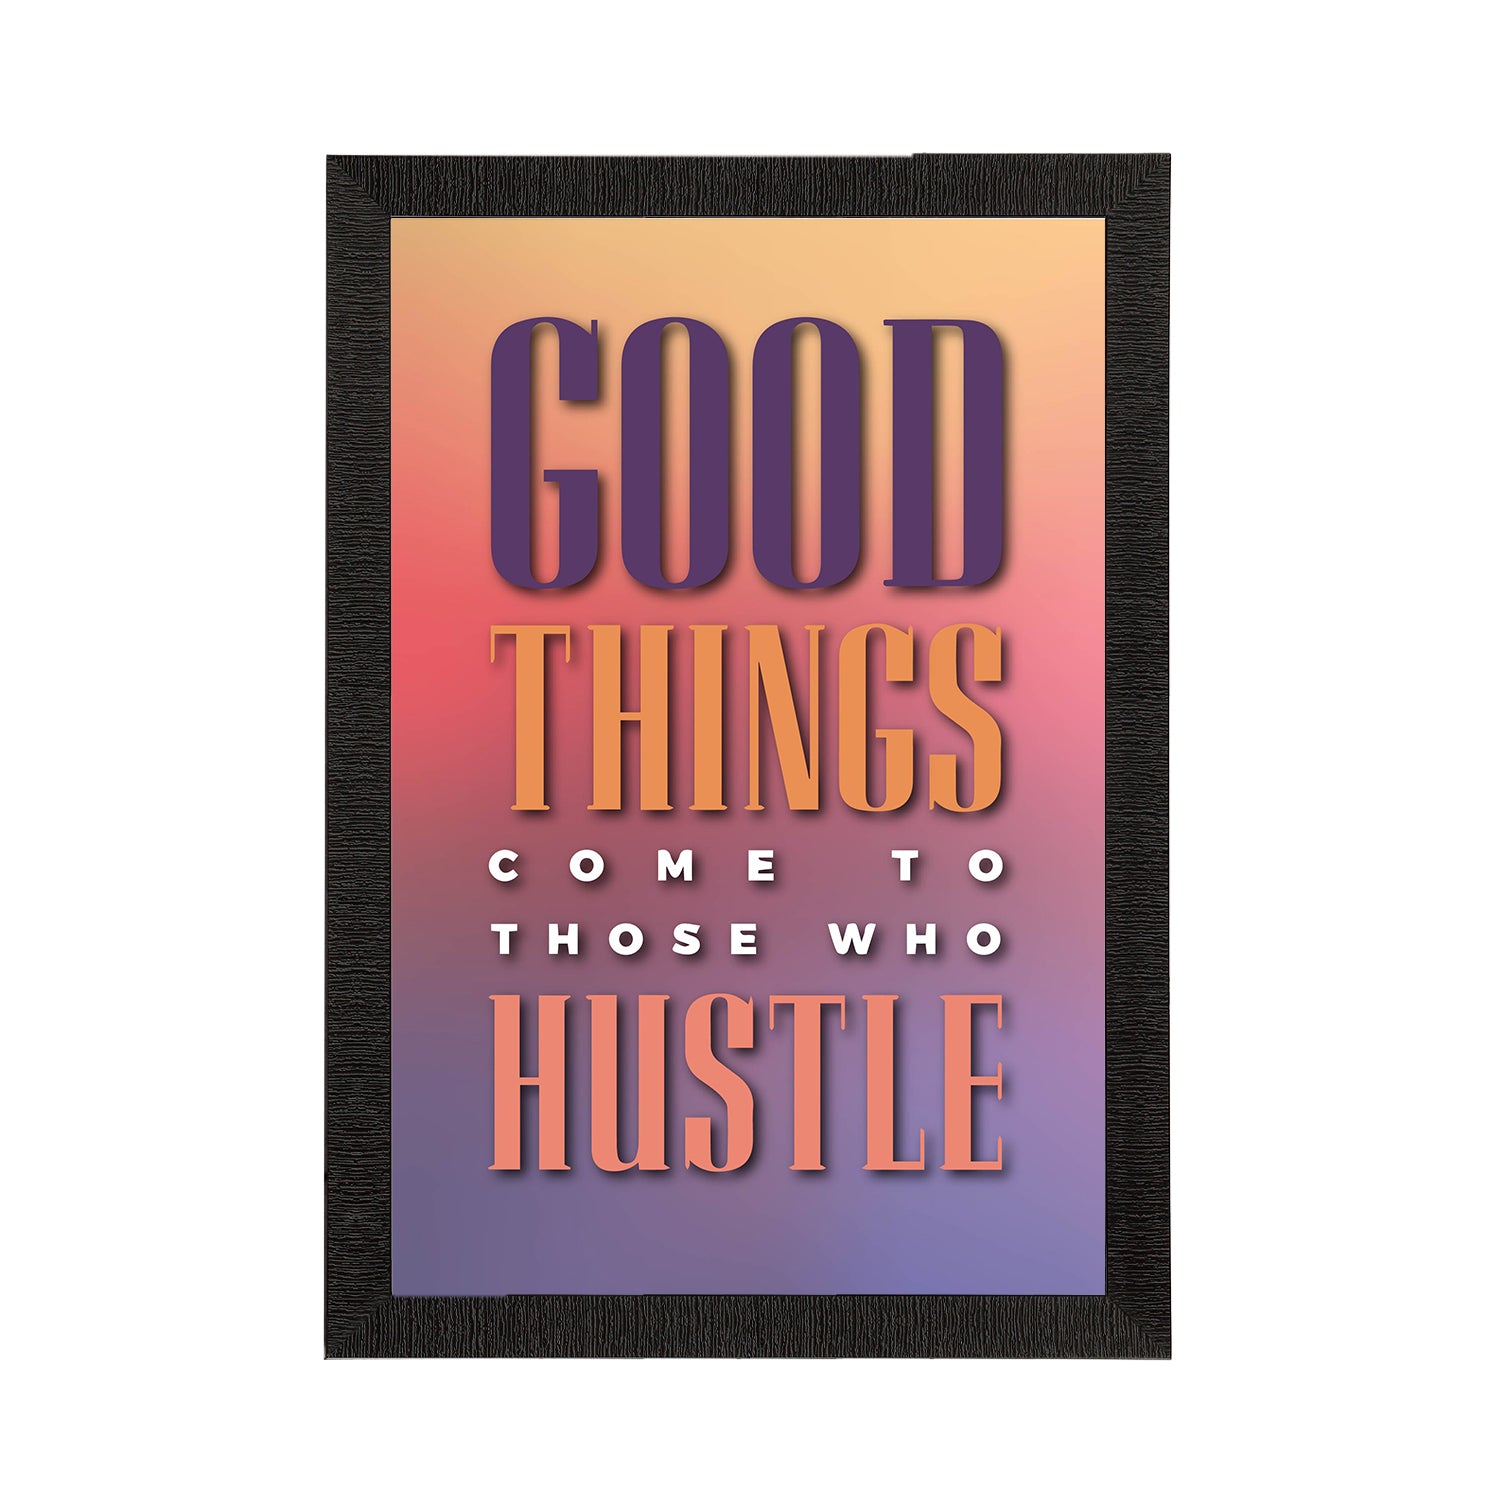 "Good Things Come to Those Who Hustle" Motivational Quote Satin Matt Texture UV Art Painting